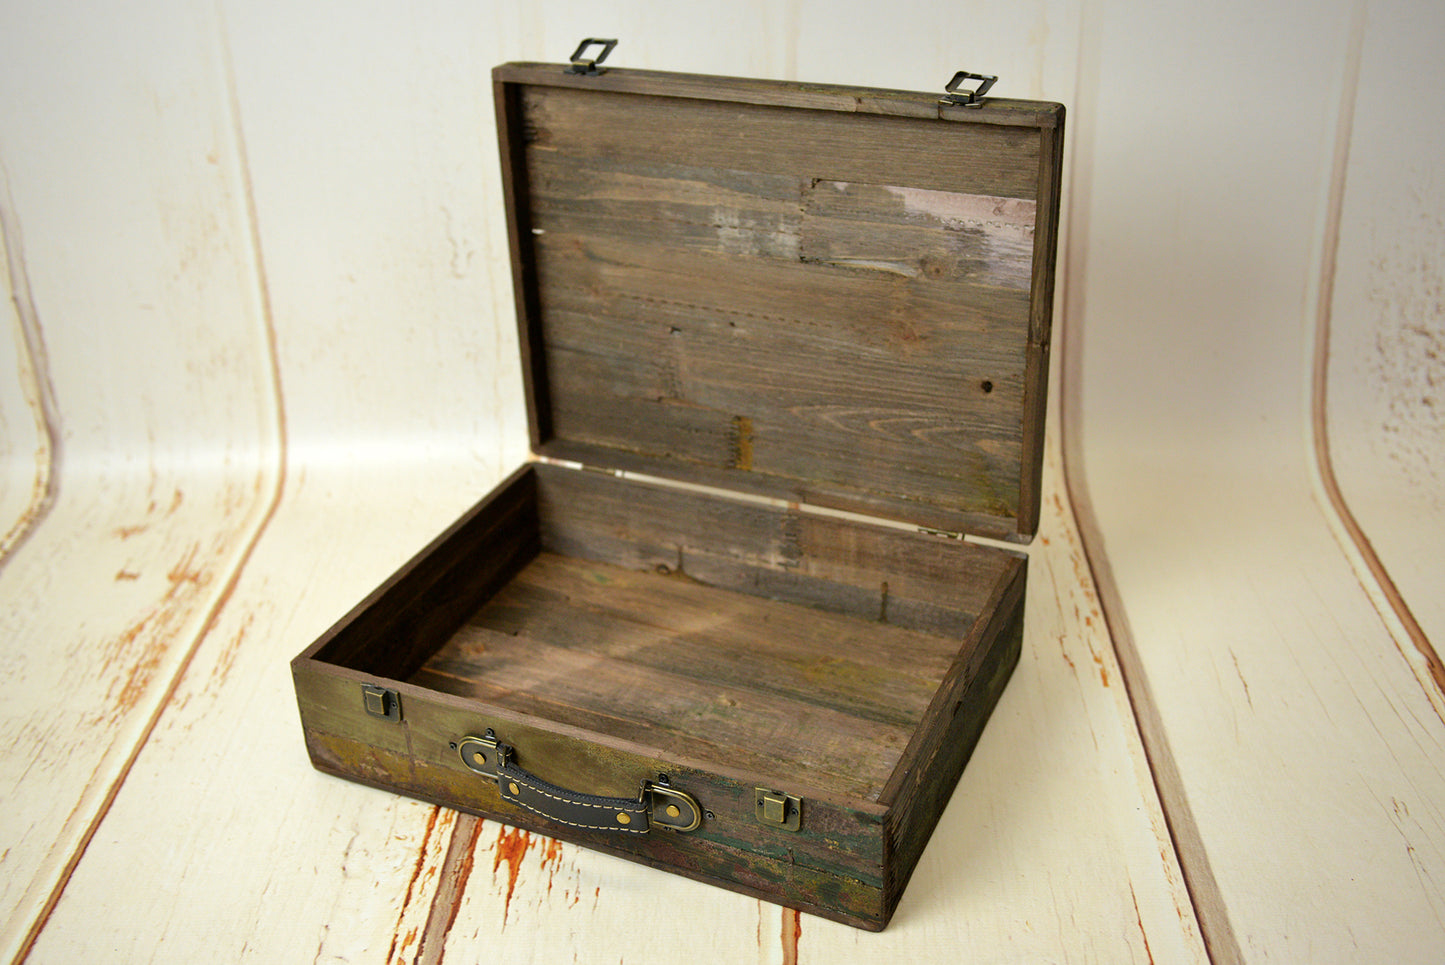 Rustic dark wood suitcase for newborn photography, made from reclaimed wood with distressed finish, perfect for vintage-inspired photo sessions at Newborn Studio Props